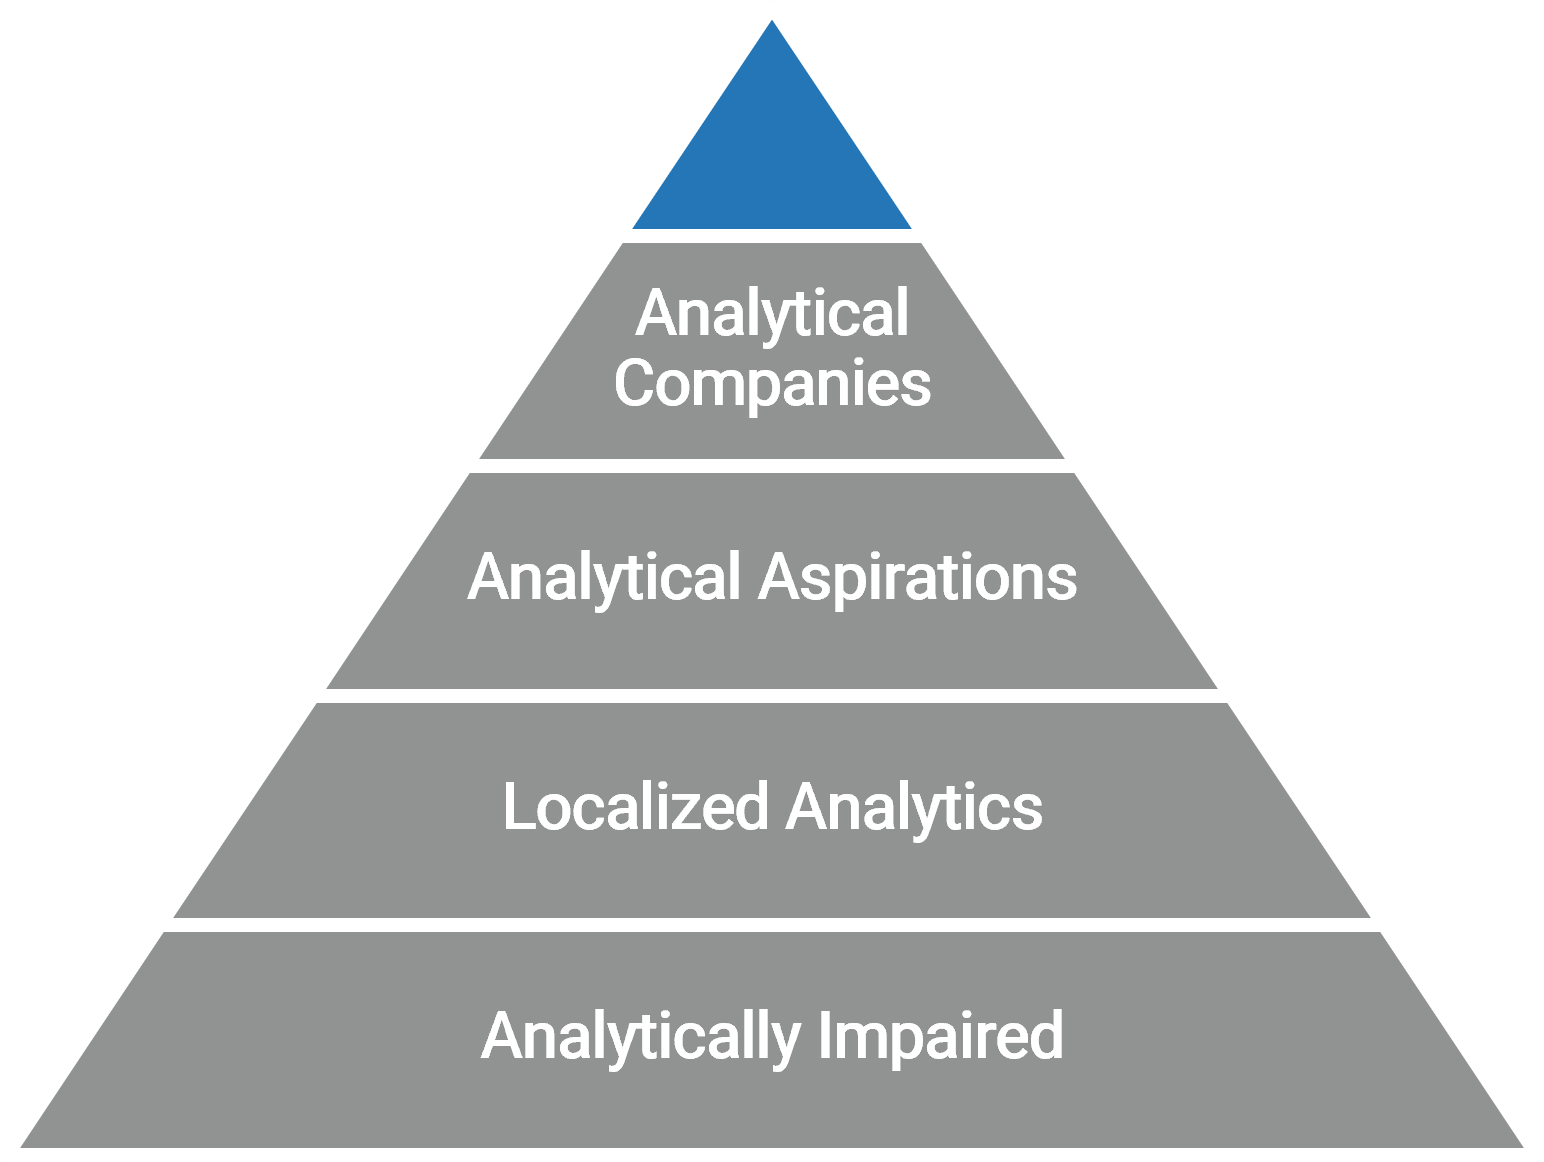 Pyramid with a blue tip. Sublevels from top down are labelled 'Analytical Companies', 'Analytical Aspirations', 'Localized Analytics', and 'Analytically Impaired'.